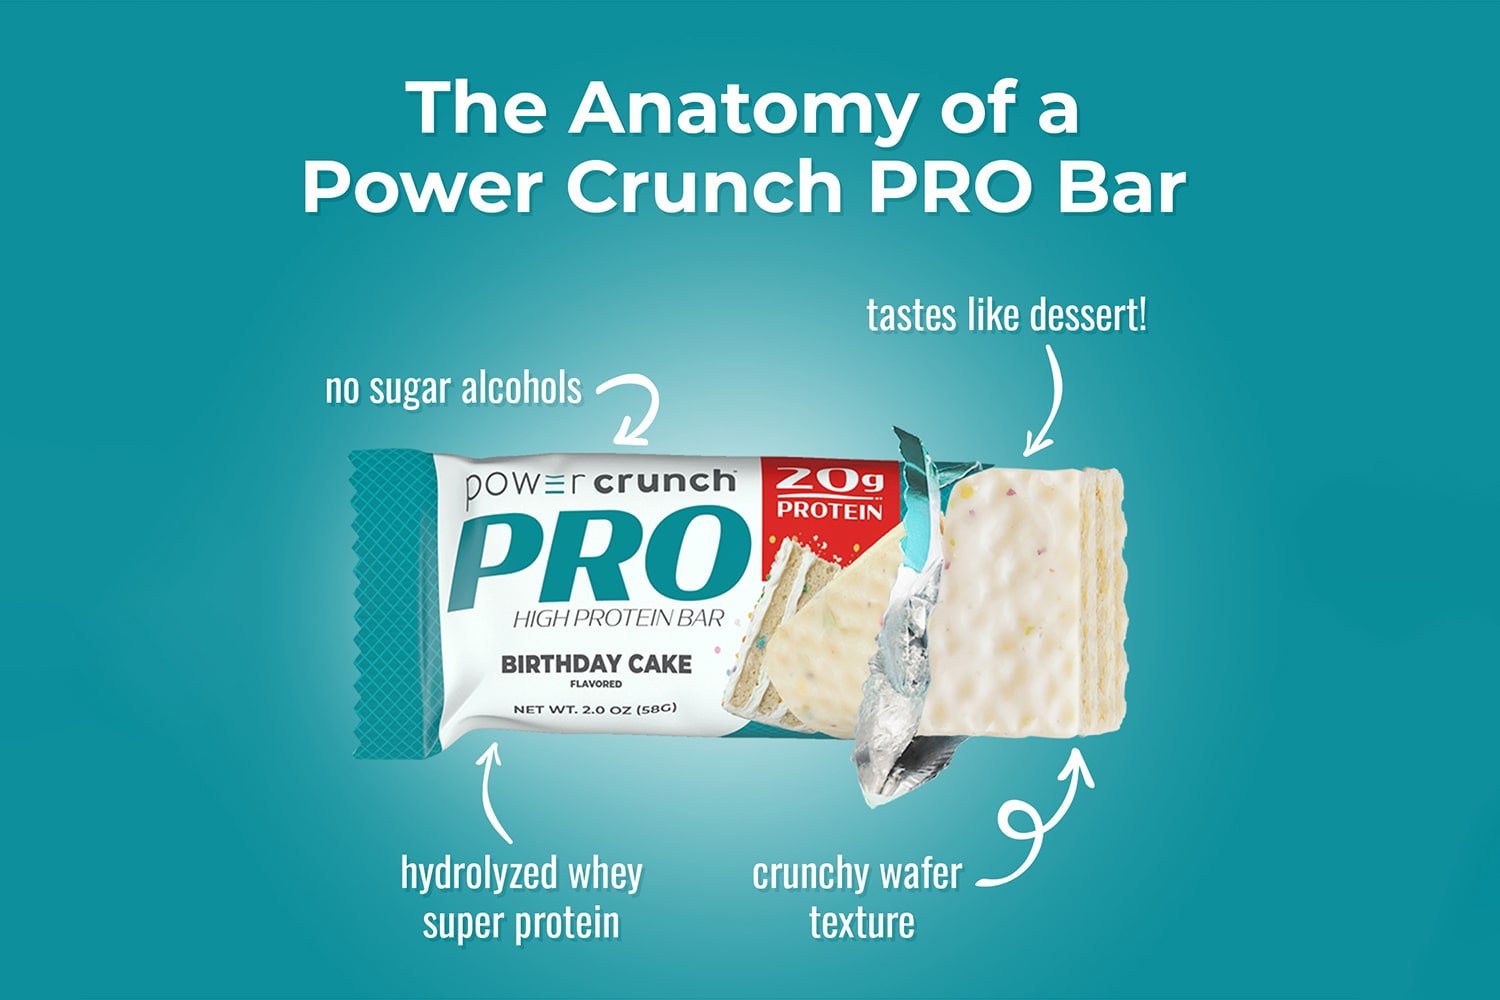 PRO Birthday Cake 20g protein bars pictured with Birthday Cake flavor explosion